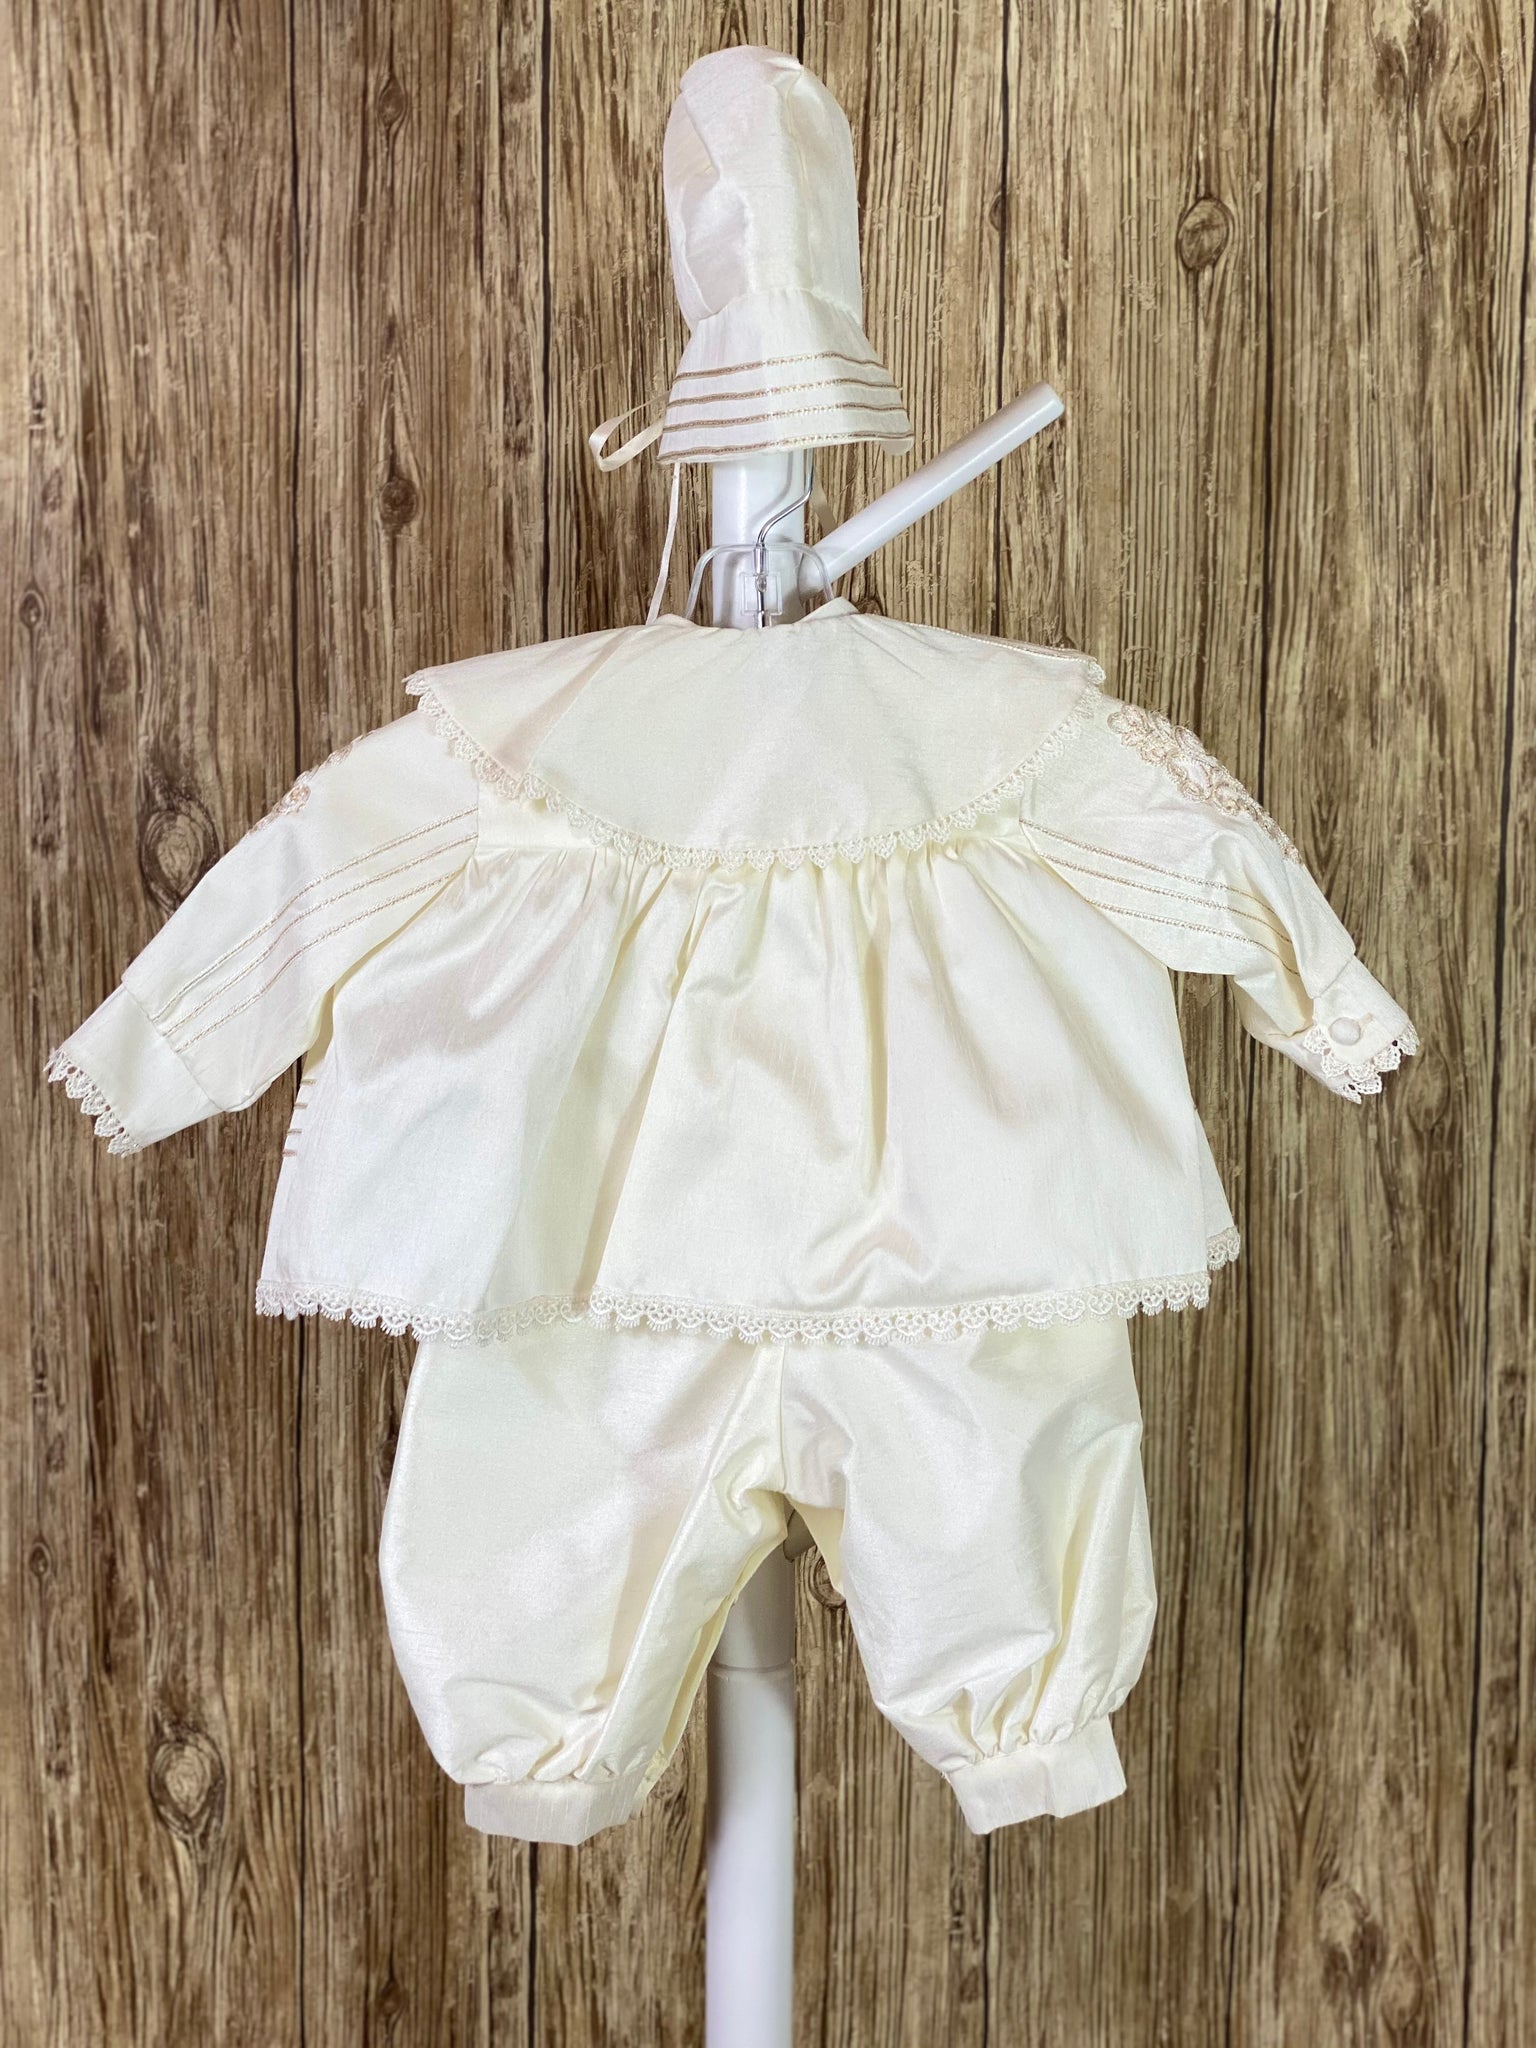 IVORY  3-piece ivory set with romper, jacket, and bonnet Solid ivory satin romper with buttons along inside of legs Collard, short sleeve romper Champagne rope detailing in L shape on jacket front Champagne rope detailing vertical along jacket collar and sleeves Embroidered appliques on jacket front Embroidered trim along jacket, collar, and sleeve edging Ribbon closure on jacket Button closure on back of romper Thin ribbon for tie on bonnet